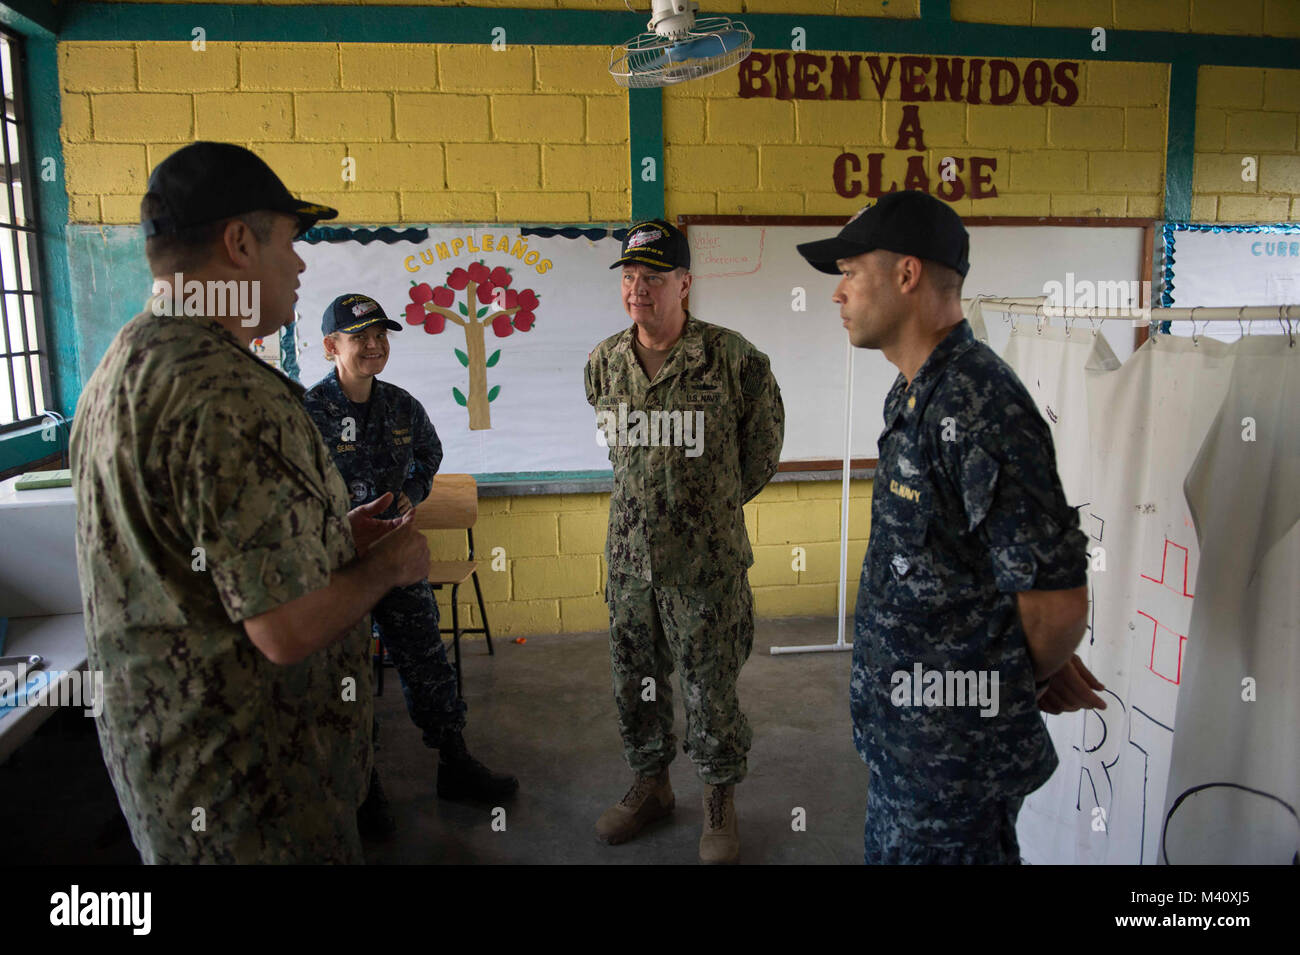 150904-N-KG407-146 COROCITO, Honduras (Sept. 4, 2015) Capt. Sam Hancock, left, Continuing Promise 2015 mission commander, speaks with Rear Adm. George Ballance, Commander, U.S. Naval Forces Southern Command/ U.S. 4th Fleet, center, during a tour of a medical site established at Centro de Educacion Basica Dr. Jesus Aquilar Paz in support of Continuing Promise 2015. Continuing Promise is a U.S. Southern Command-sponsored and U.S. Naval Forces Southern Command/U.S. 4th Fleet-conducted deployment to conduct civil-military operations including humanitarian-civil assistance, subject matter expert ex Stock Photo